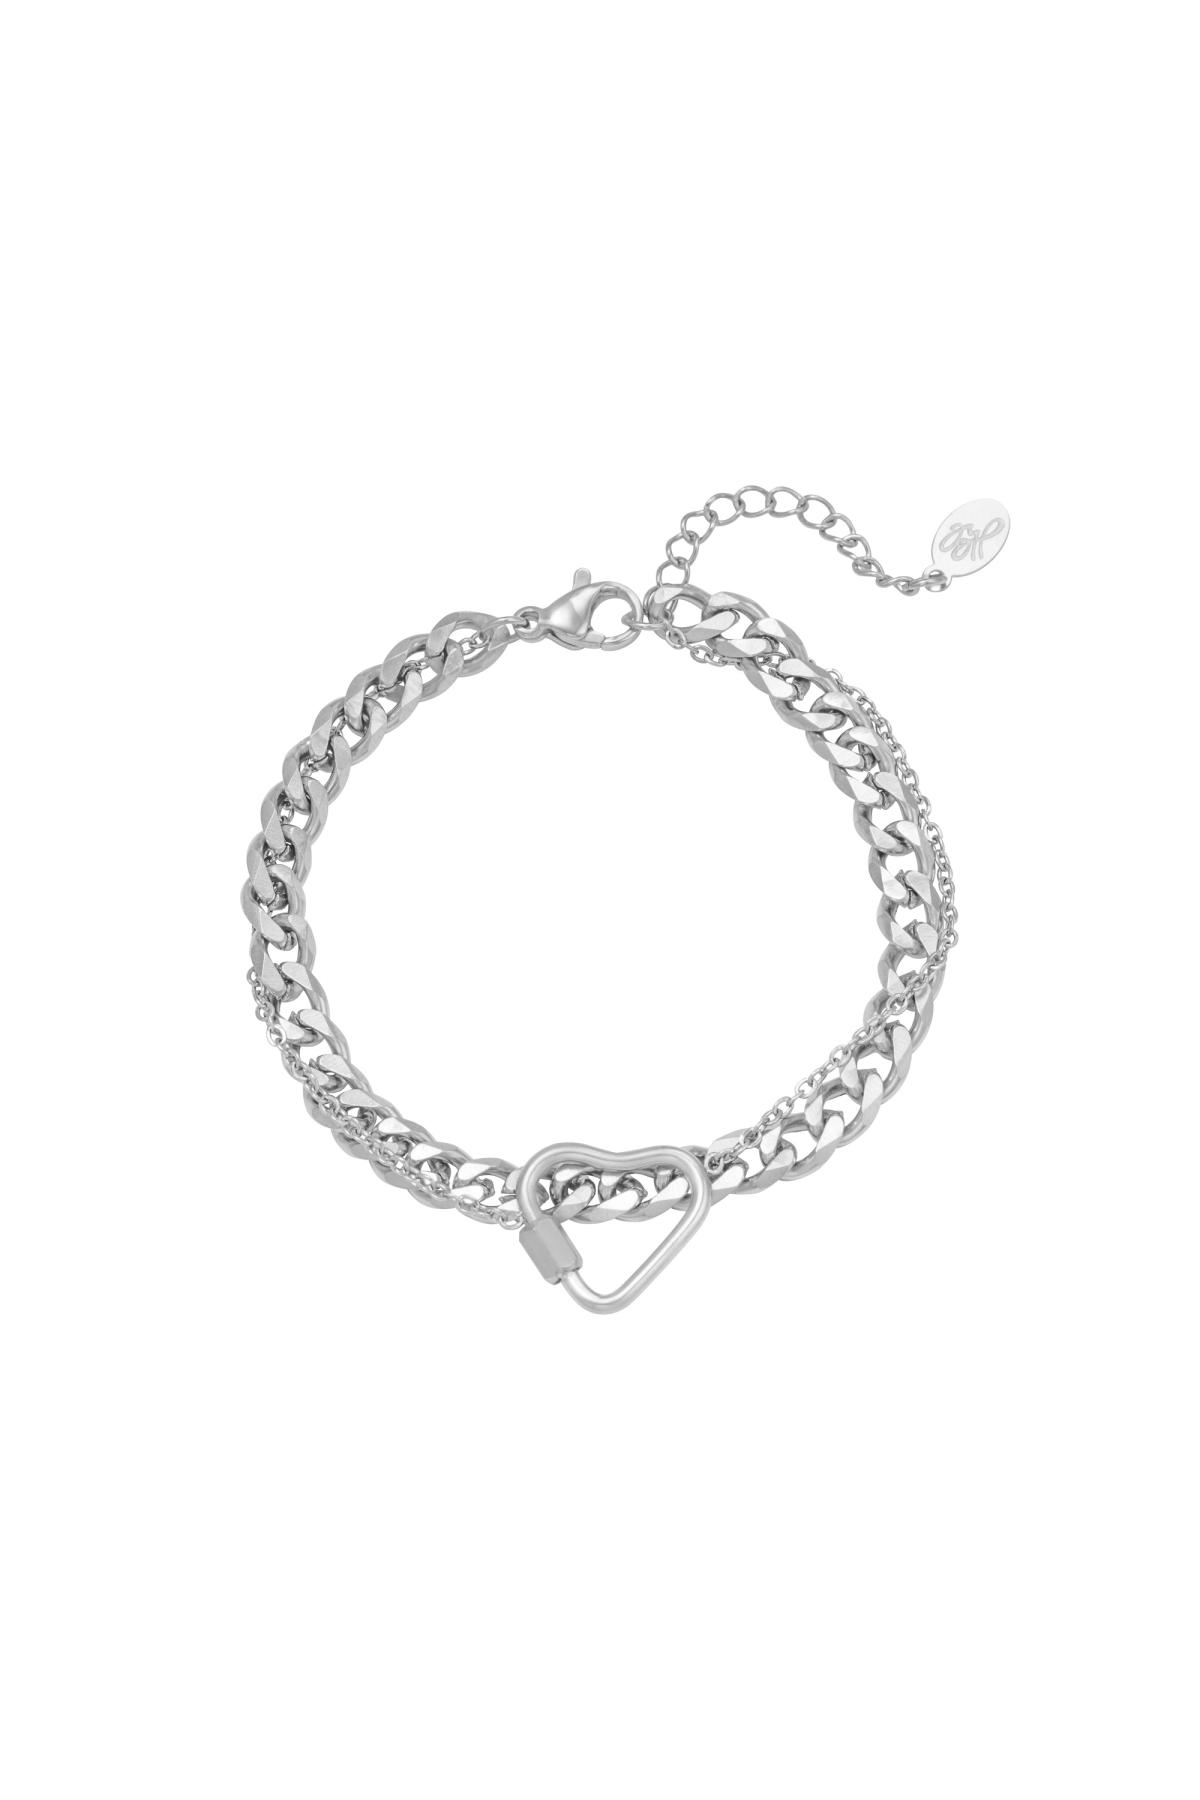 Bracelet Chained Heart Silver Stainless Steel h5 